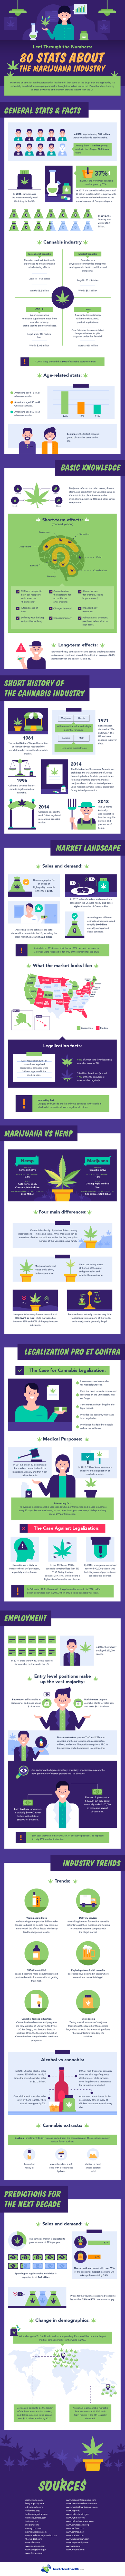 80 Stats About the Marijuana Industry